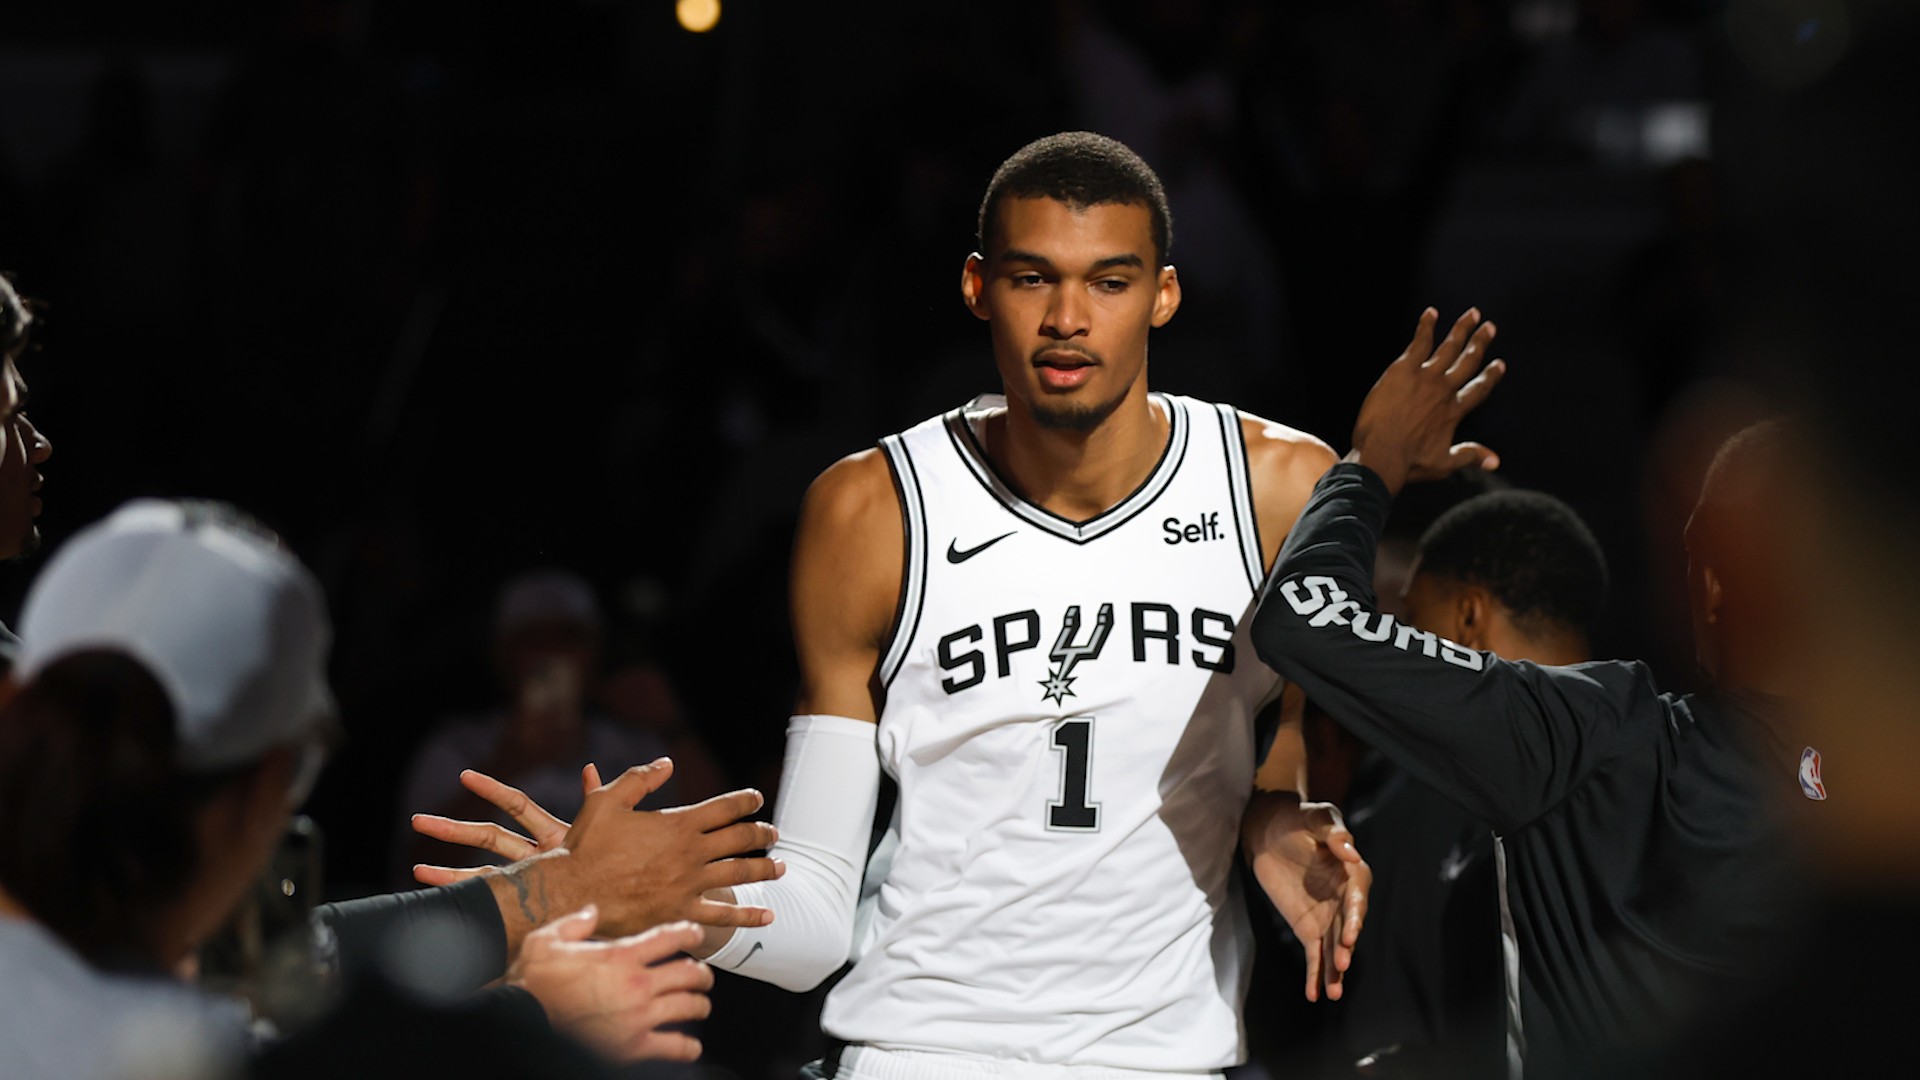 Spurs Lose Final Game, Miss Playoffs for First Time